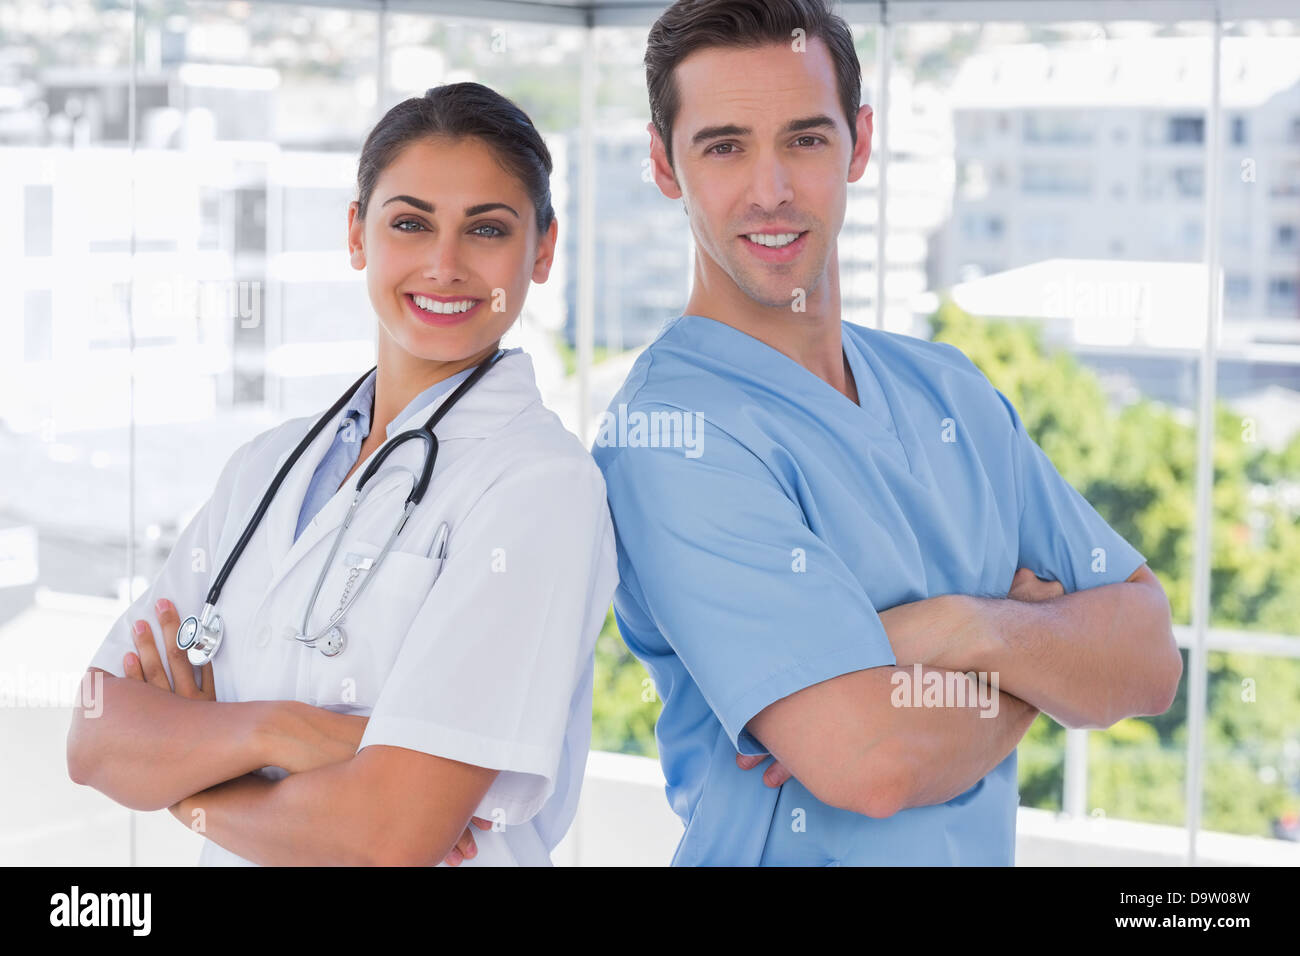 Medical staff standing with arms crossed Stock Photo